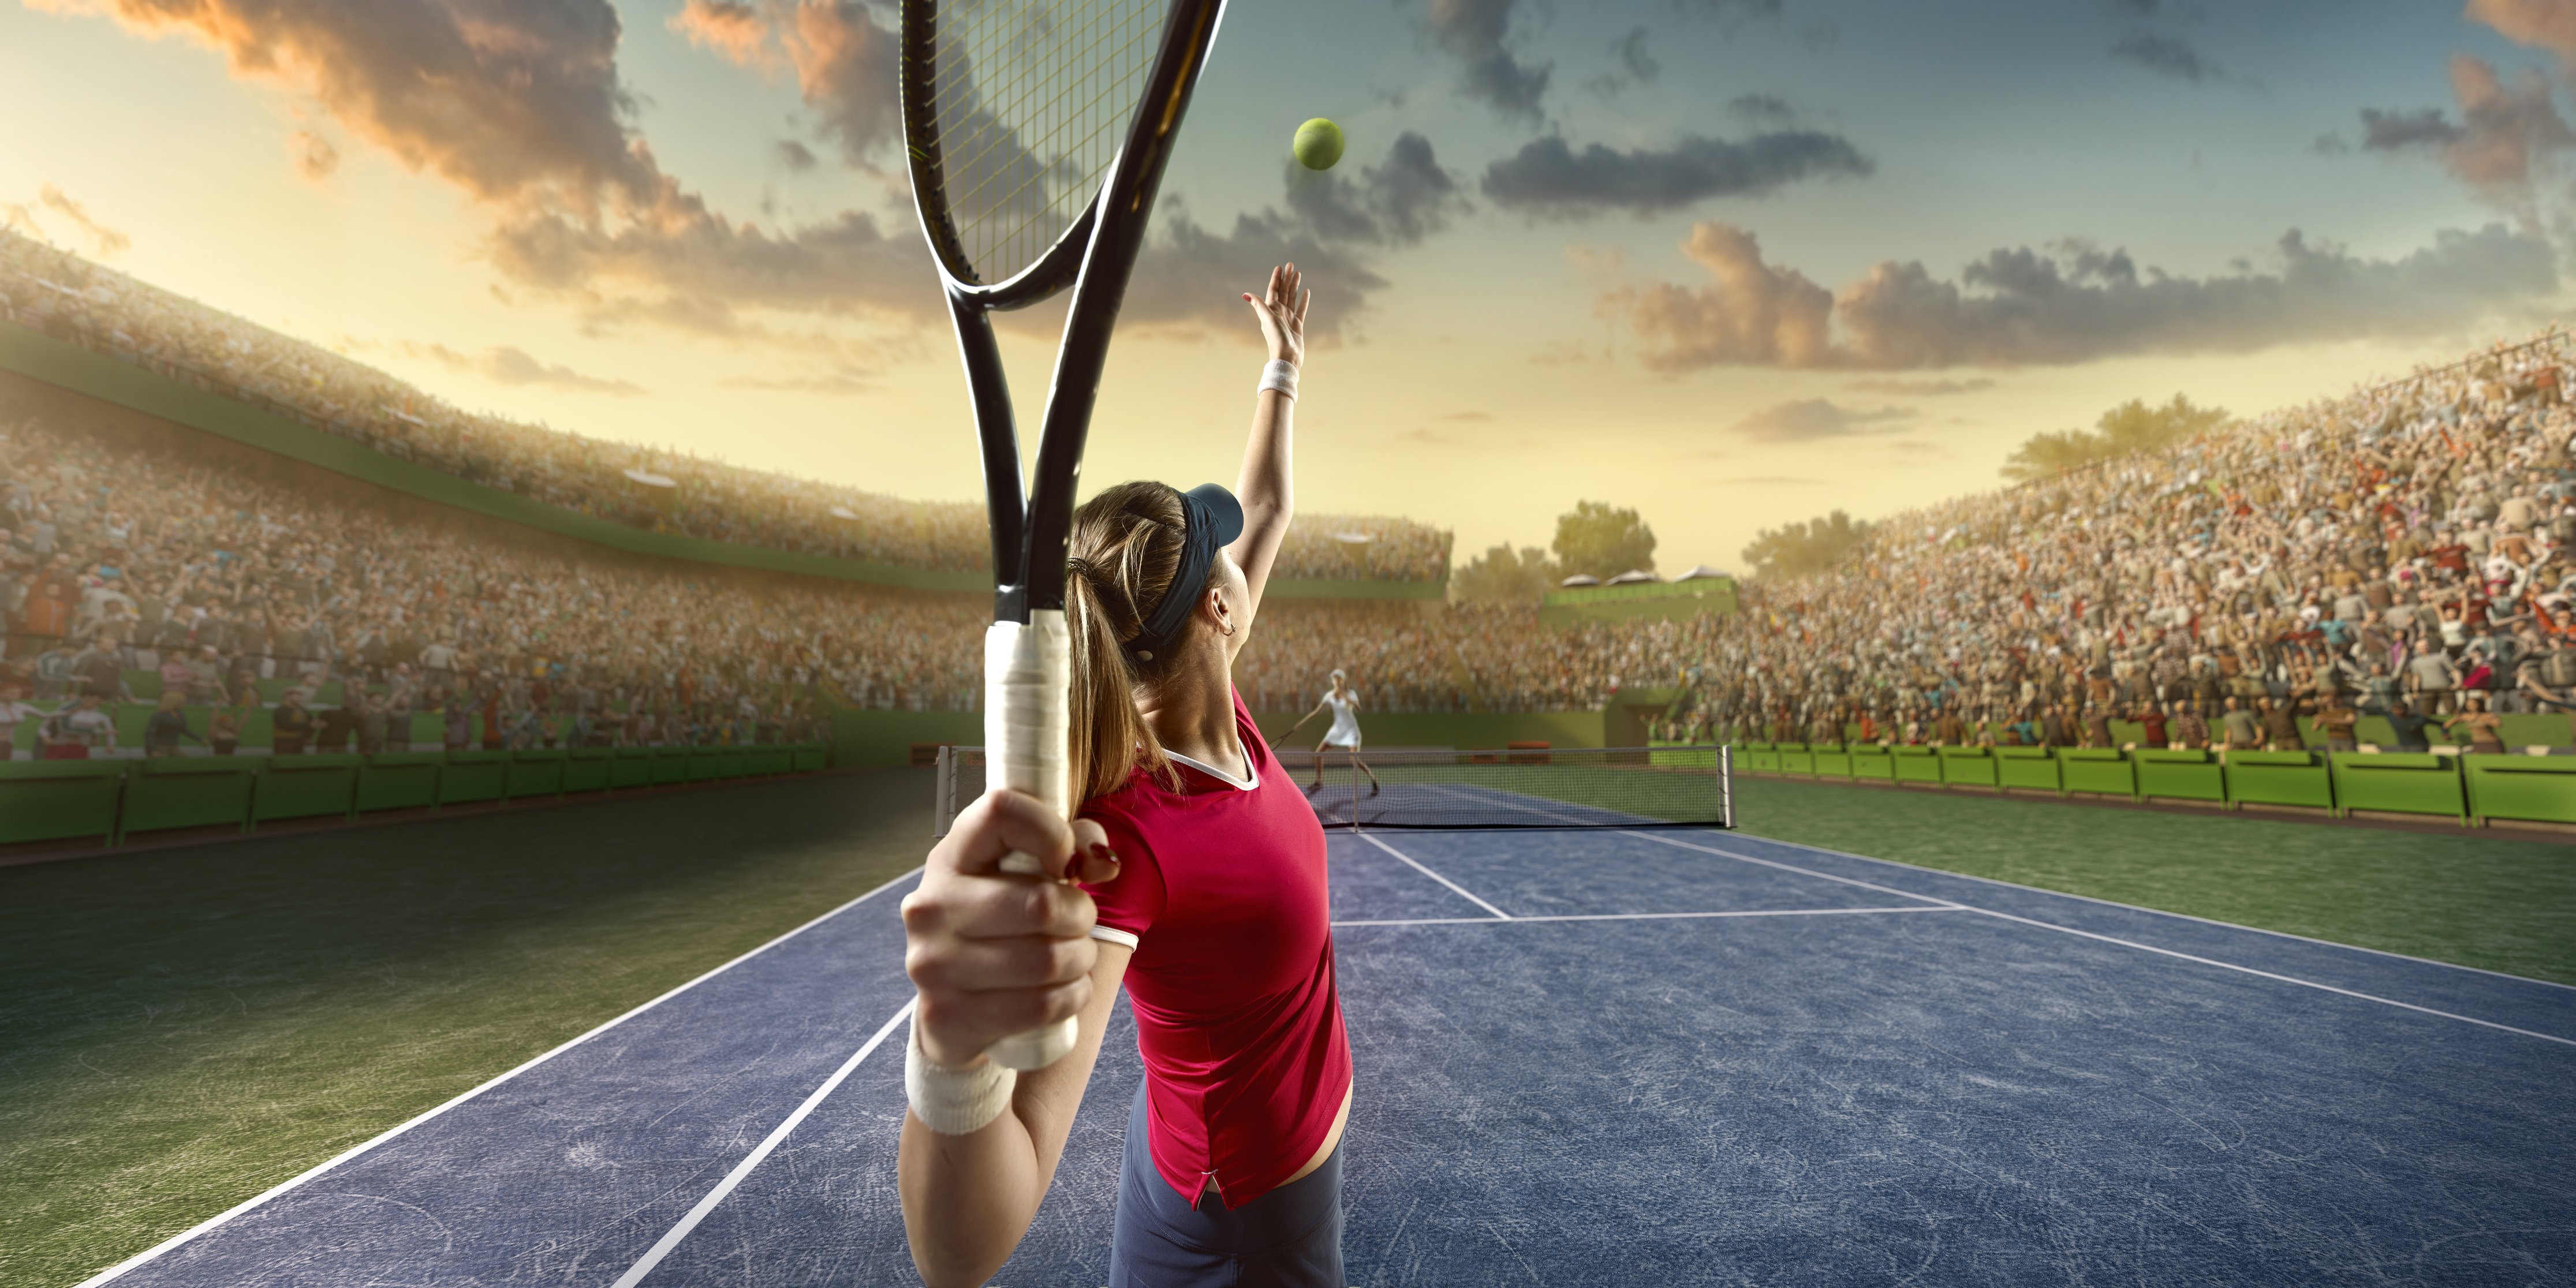 some winning strategies that can help you take your tennis game to the next level.